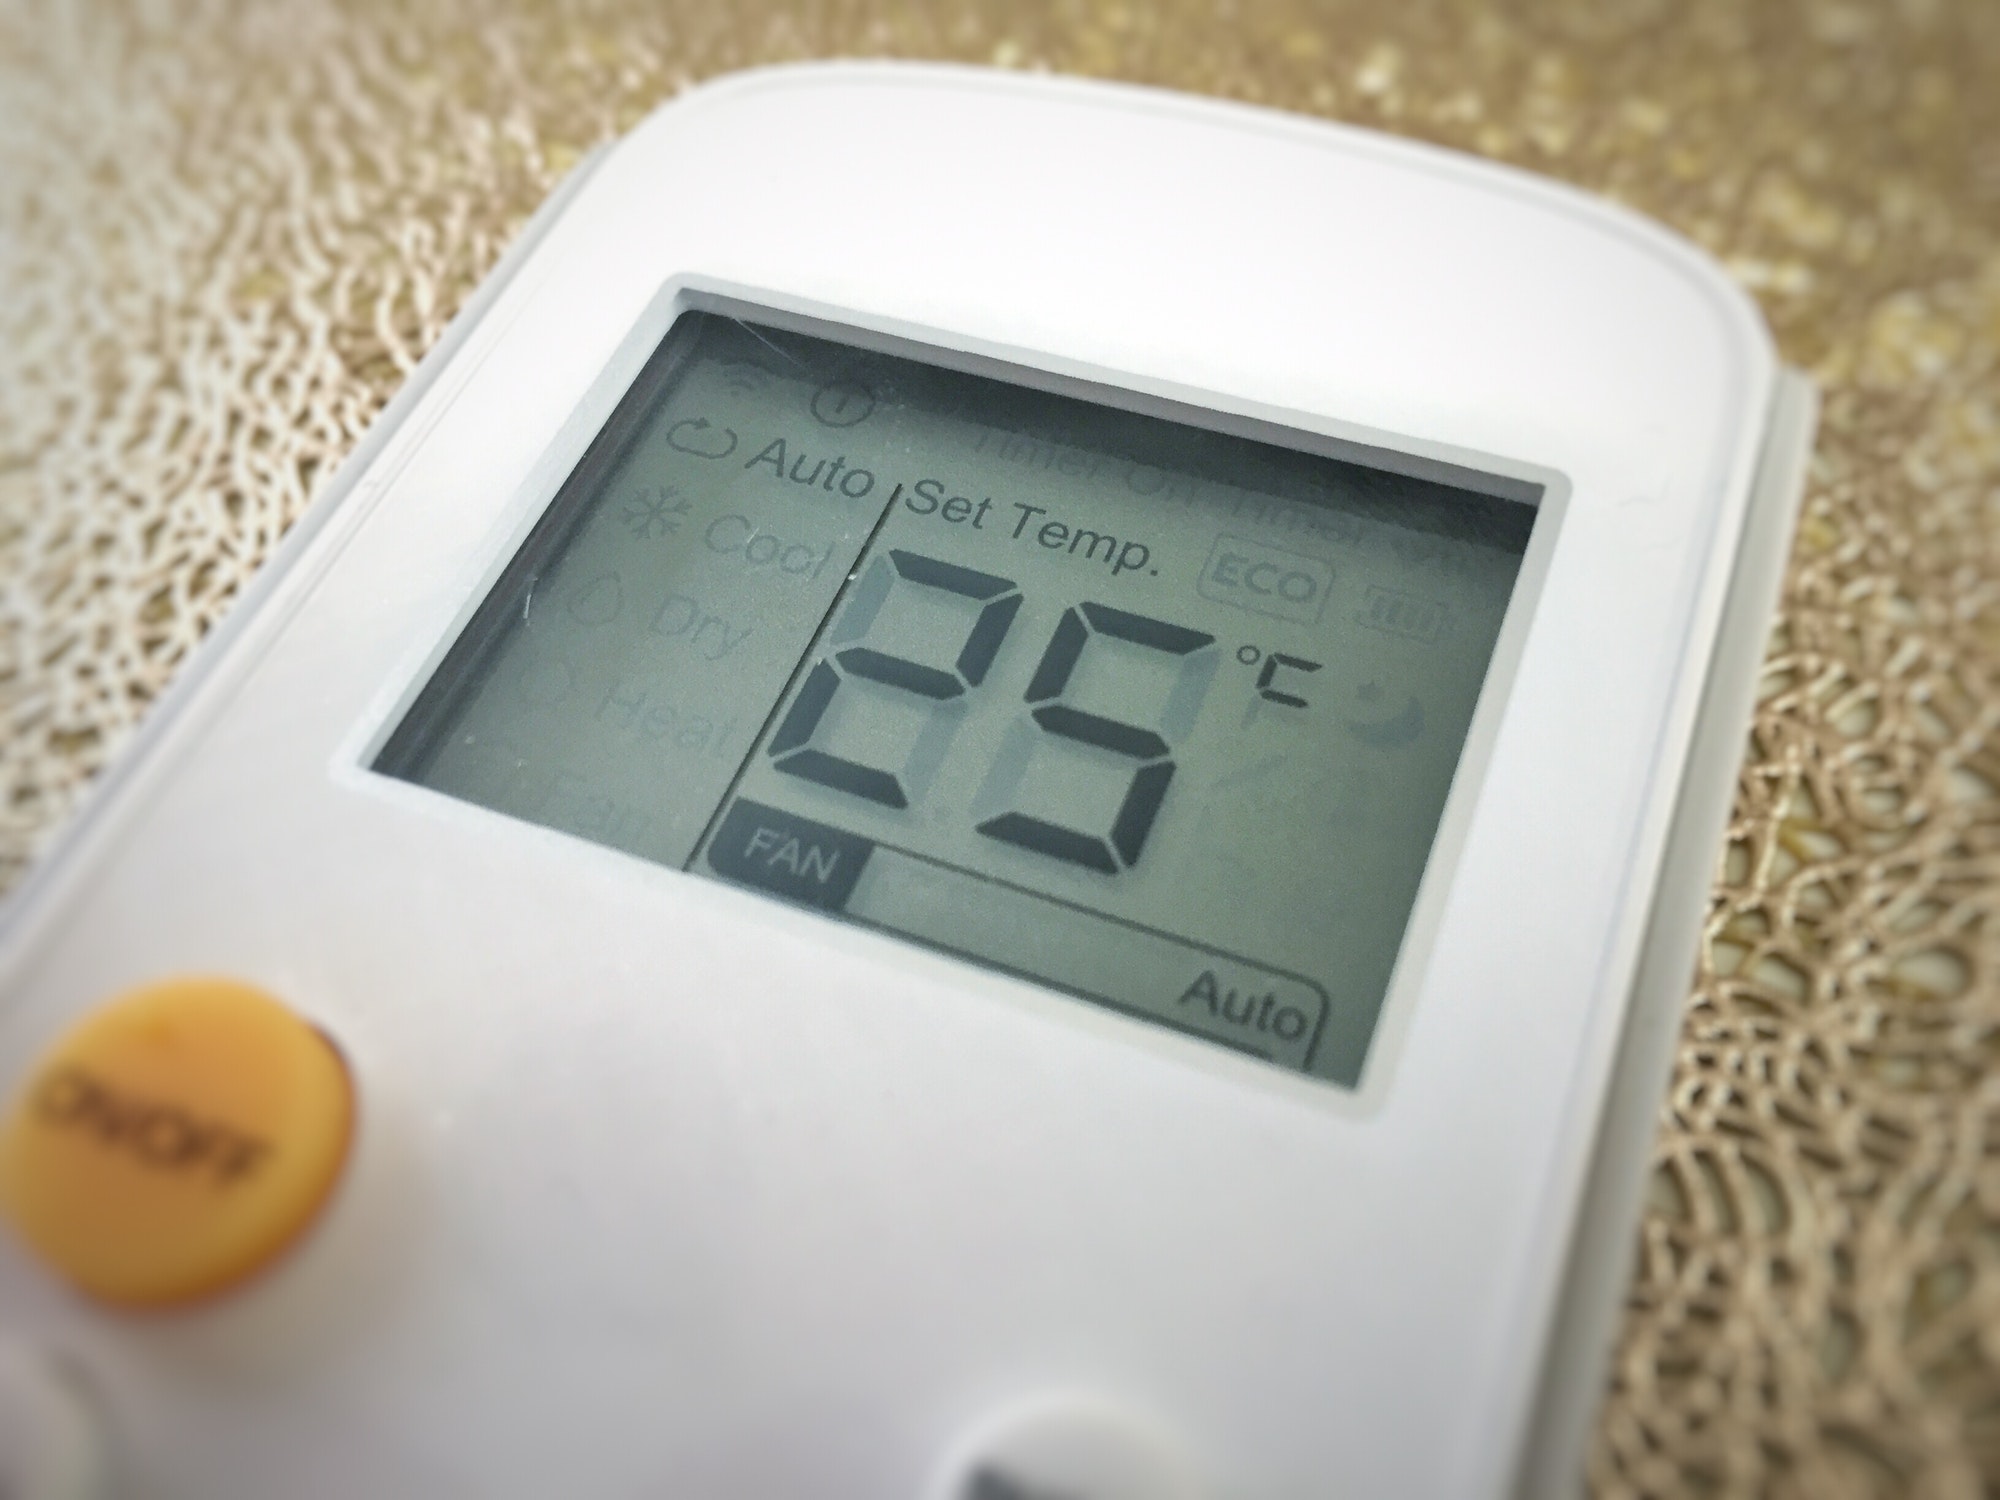 Display of an air conditioner remote control with temperature set at 25 degrees